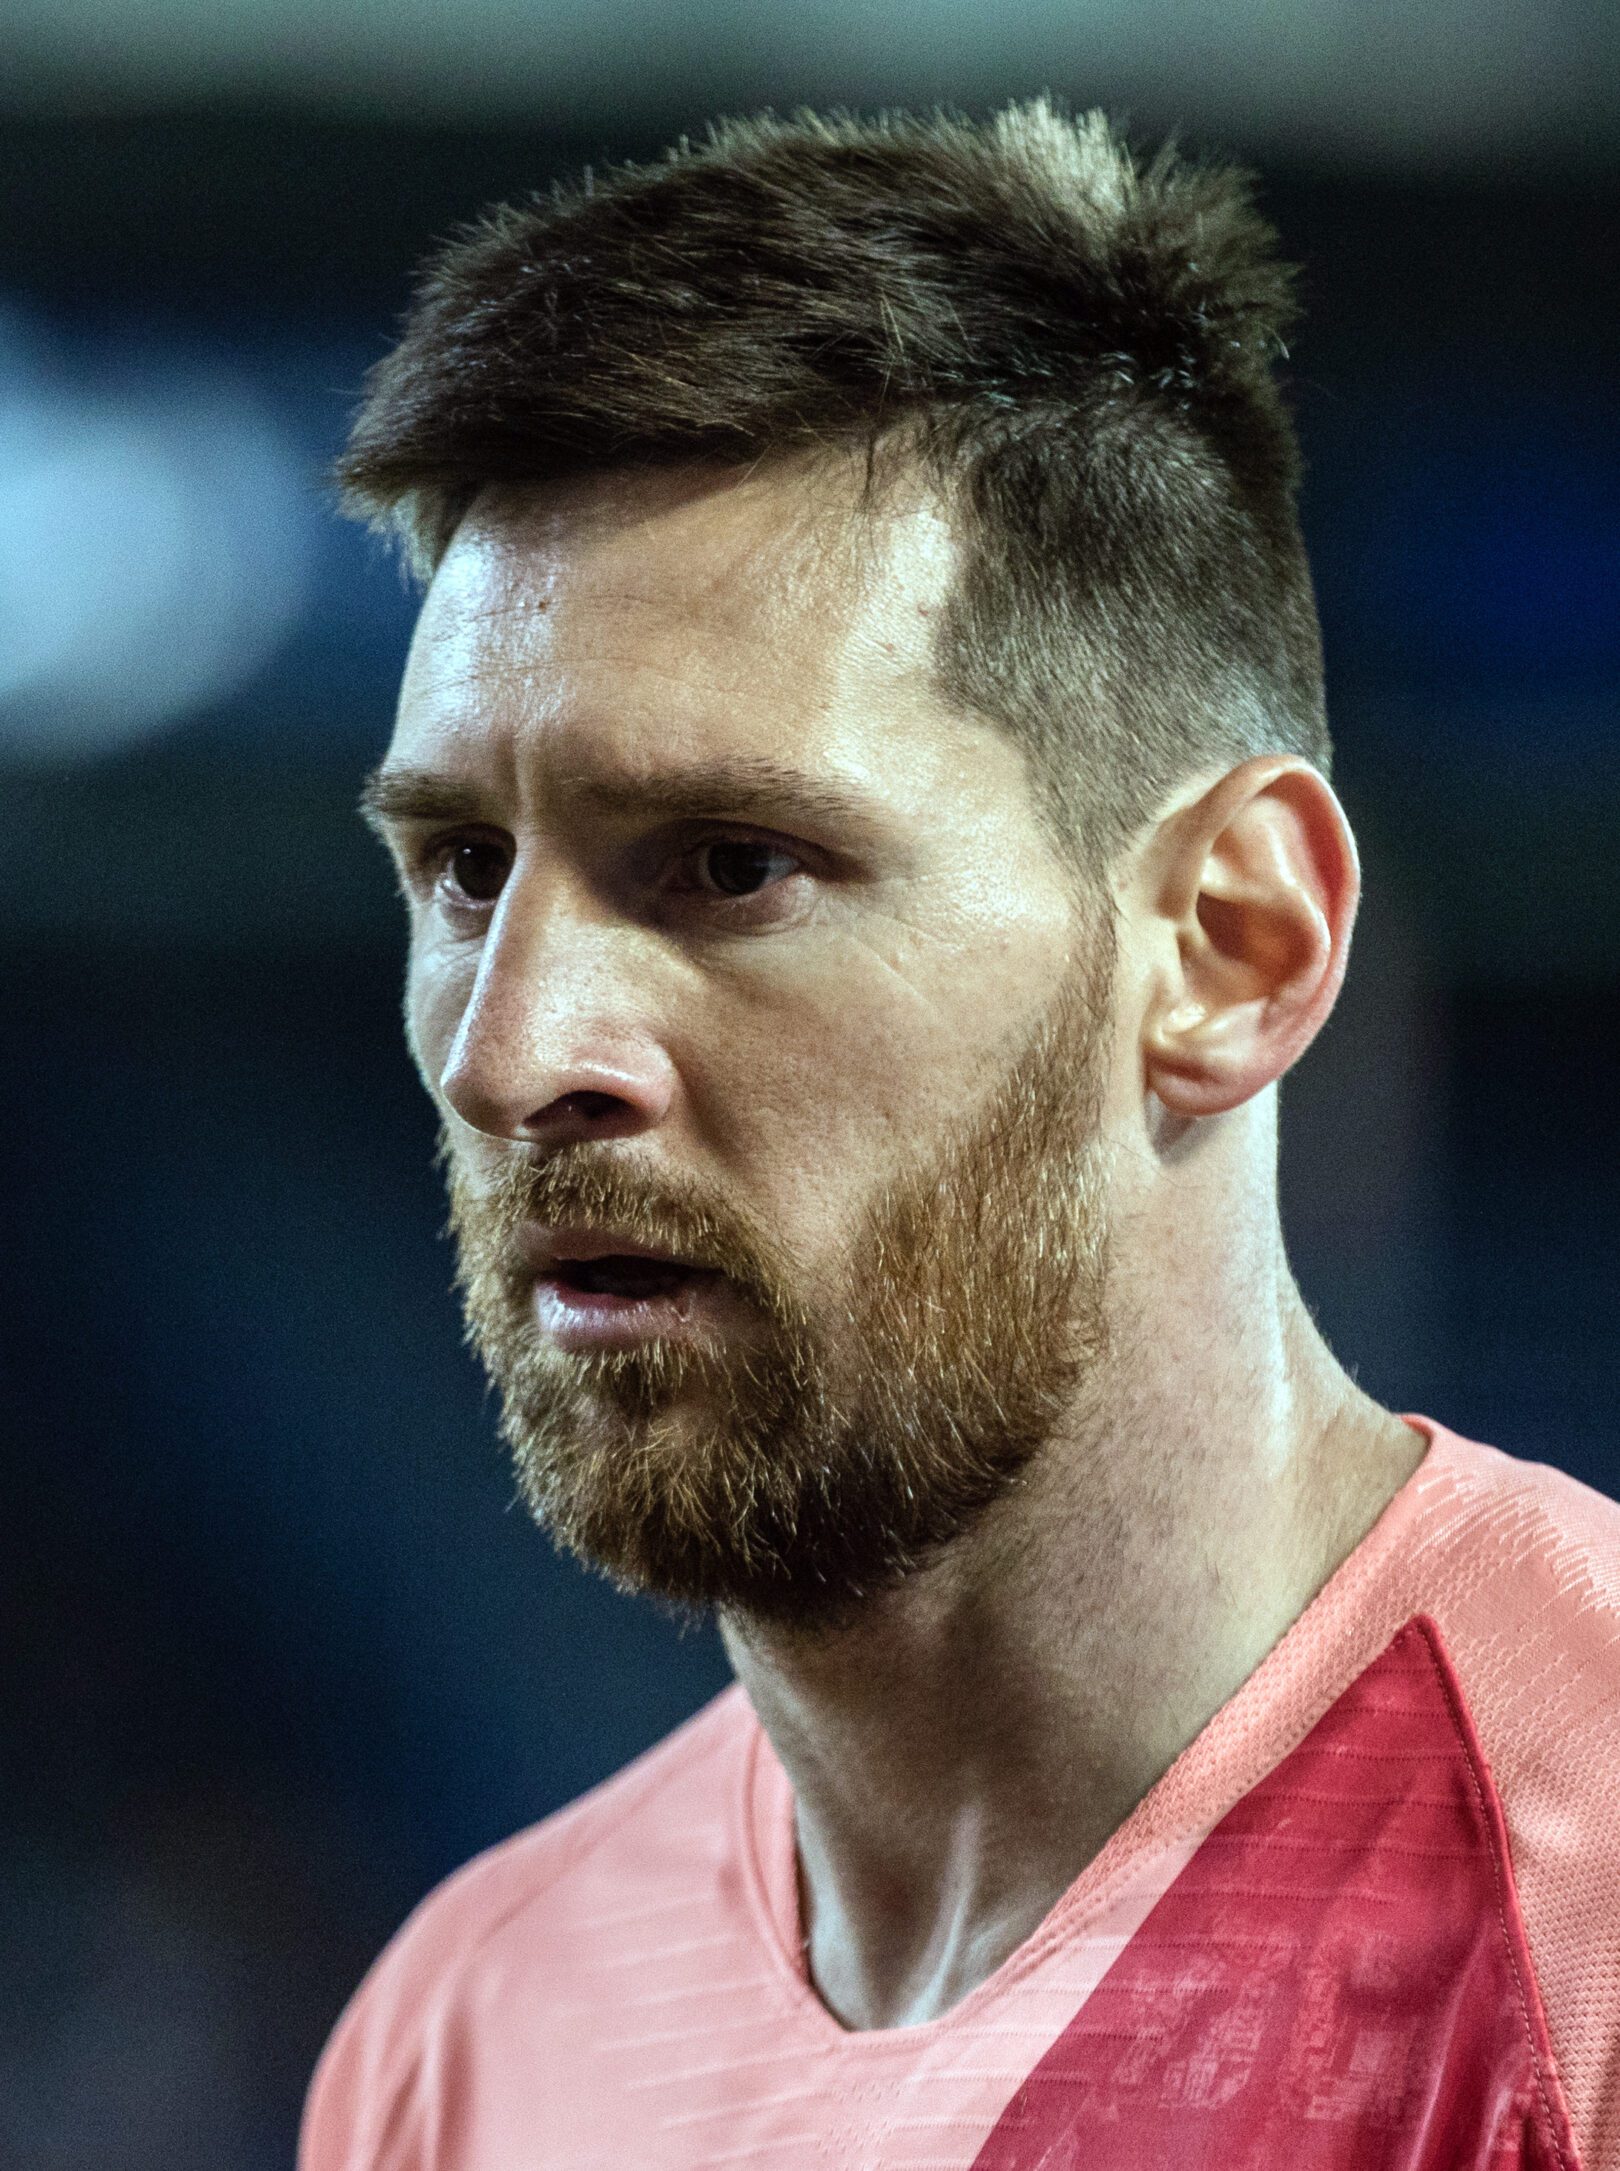 Lionel Messi’s Top 10 Most Iconic Hairstyles | Haircut Inspiration